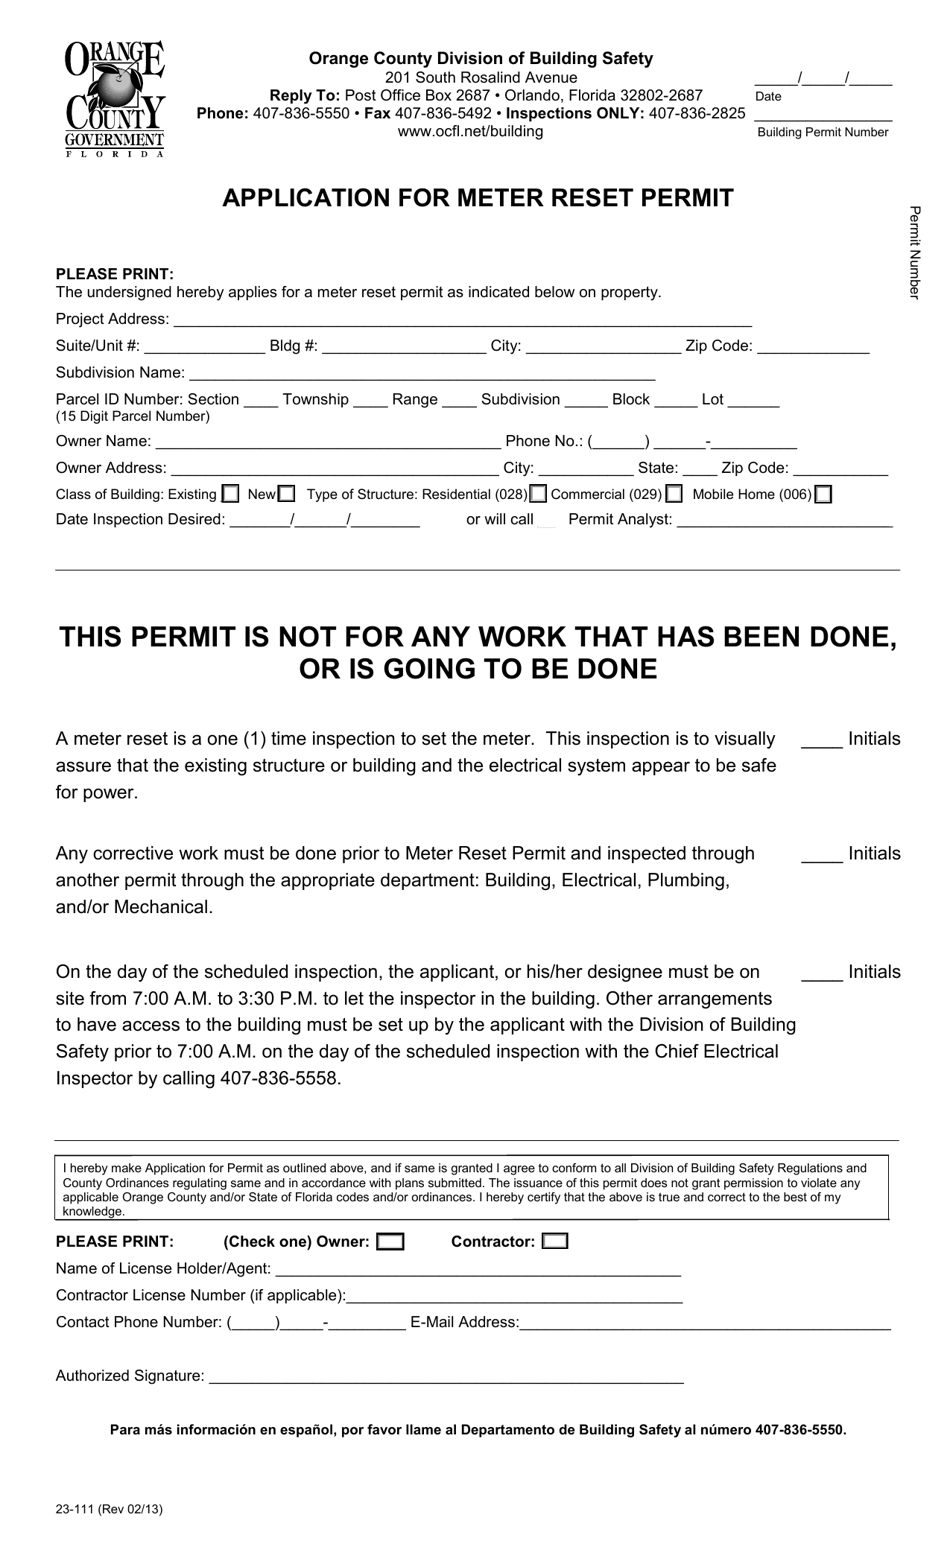 Form 23-111 Application for Meter Reset Permit - Orange County, Florida, Page 1